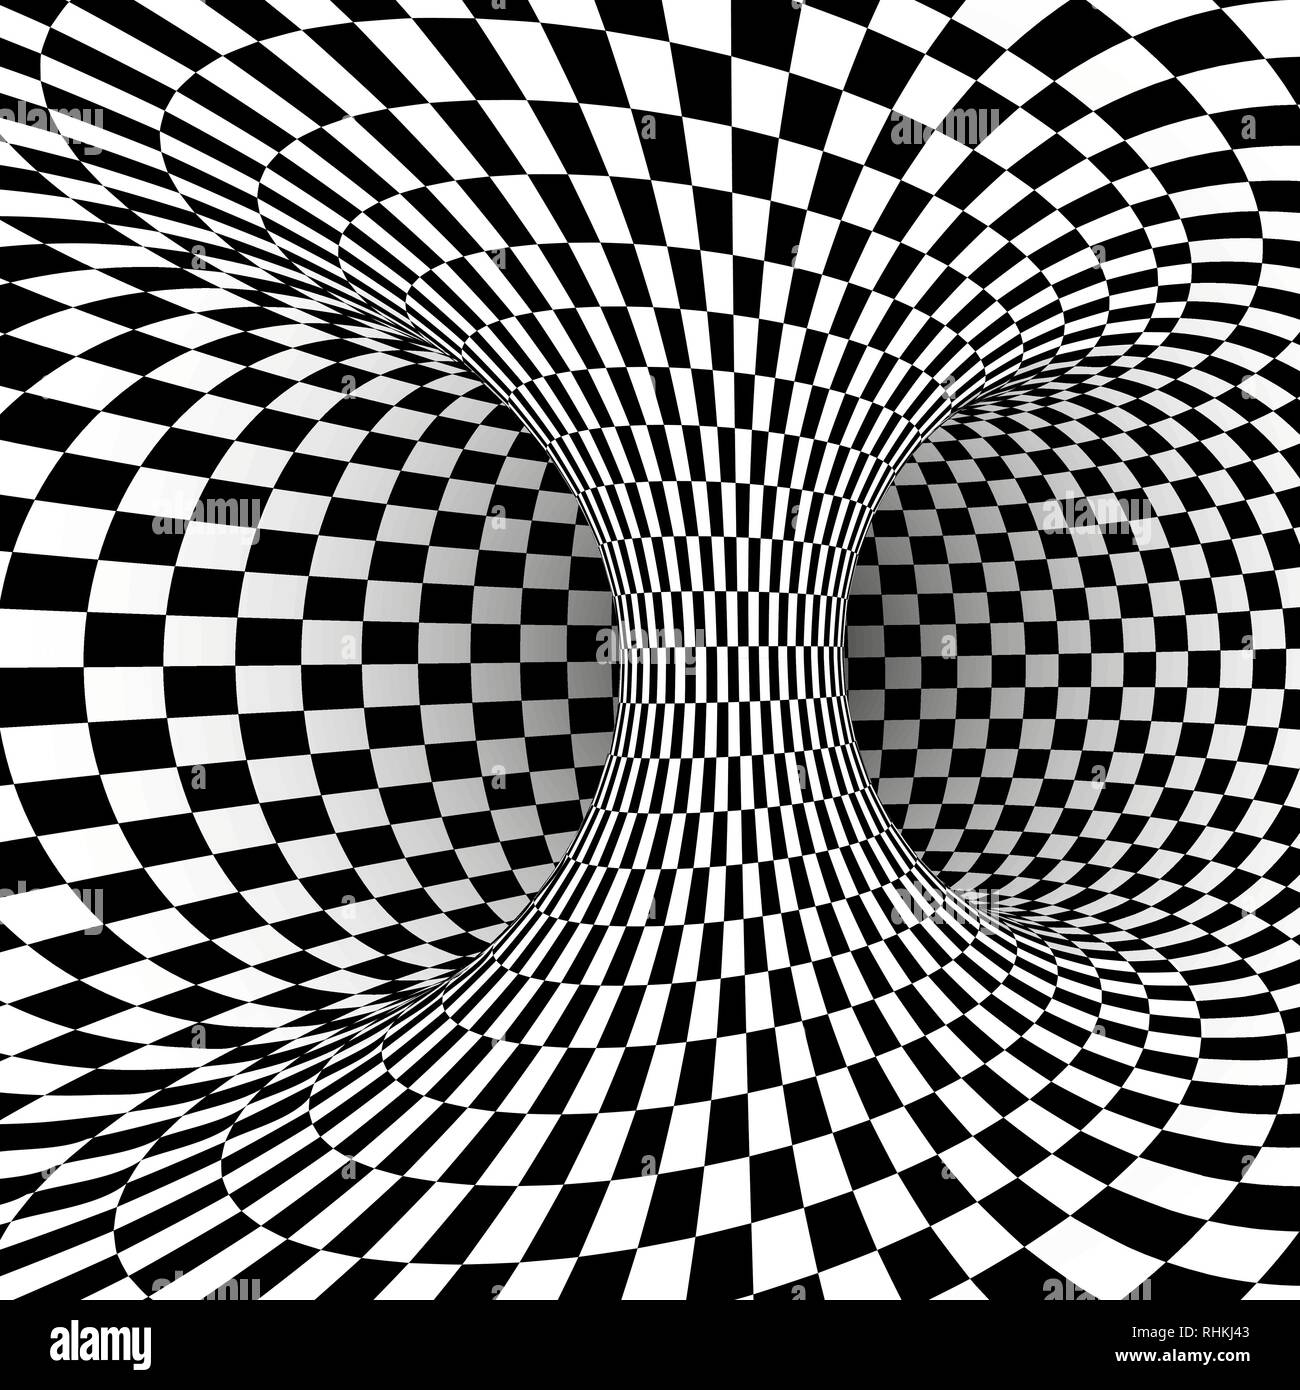 Black and white square optical illusion. Abstract chess illusion background. Vector illustration Stock Vector